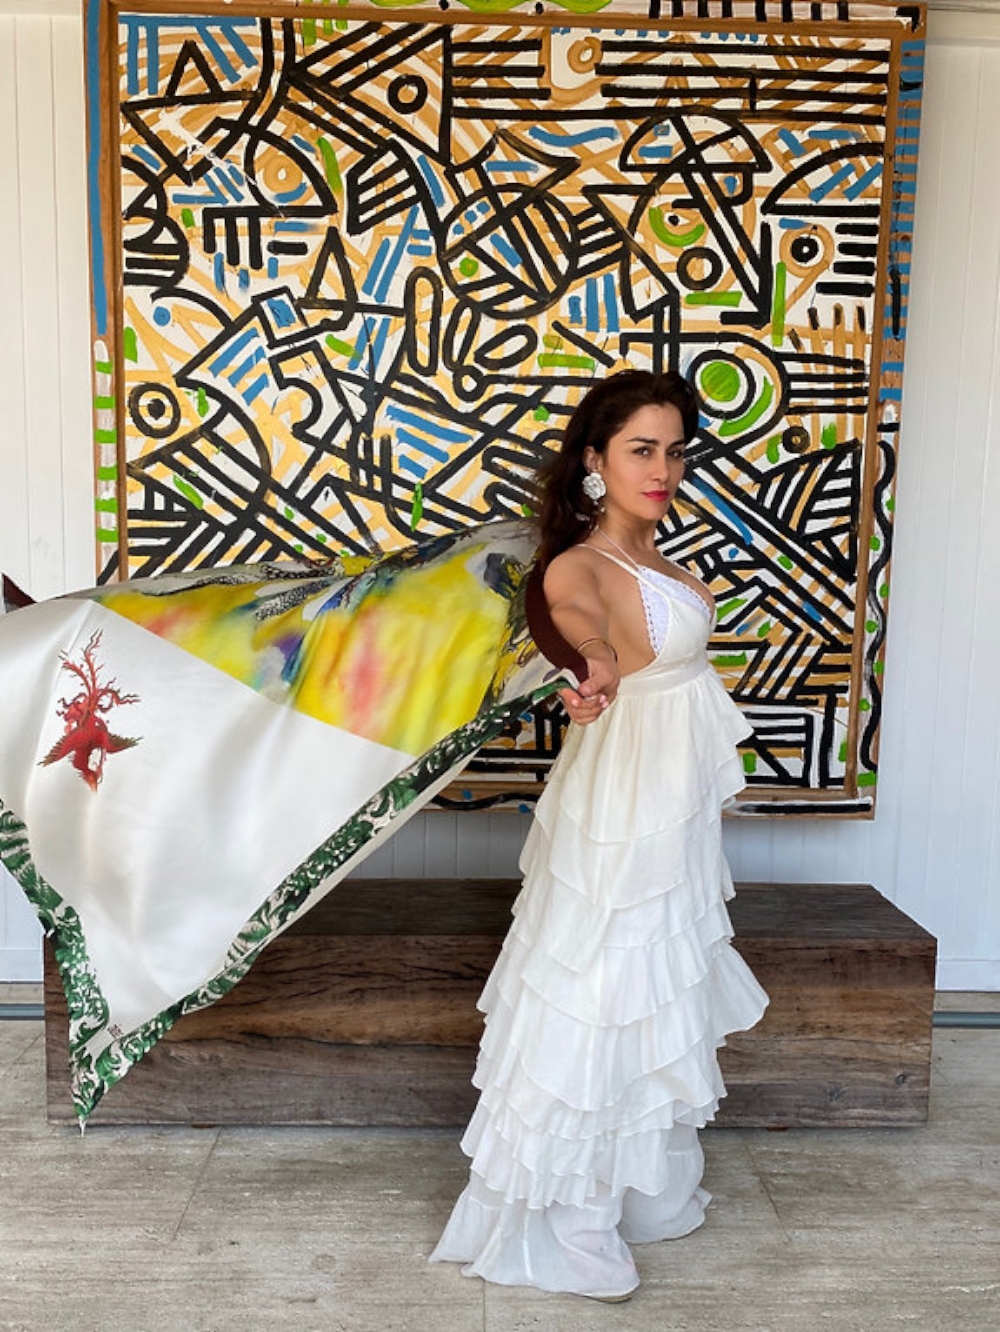 Elnaz Jàfari modelling her own designed toncha cloth 'Earth Element' that can be wrapped in many ways too.